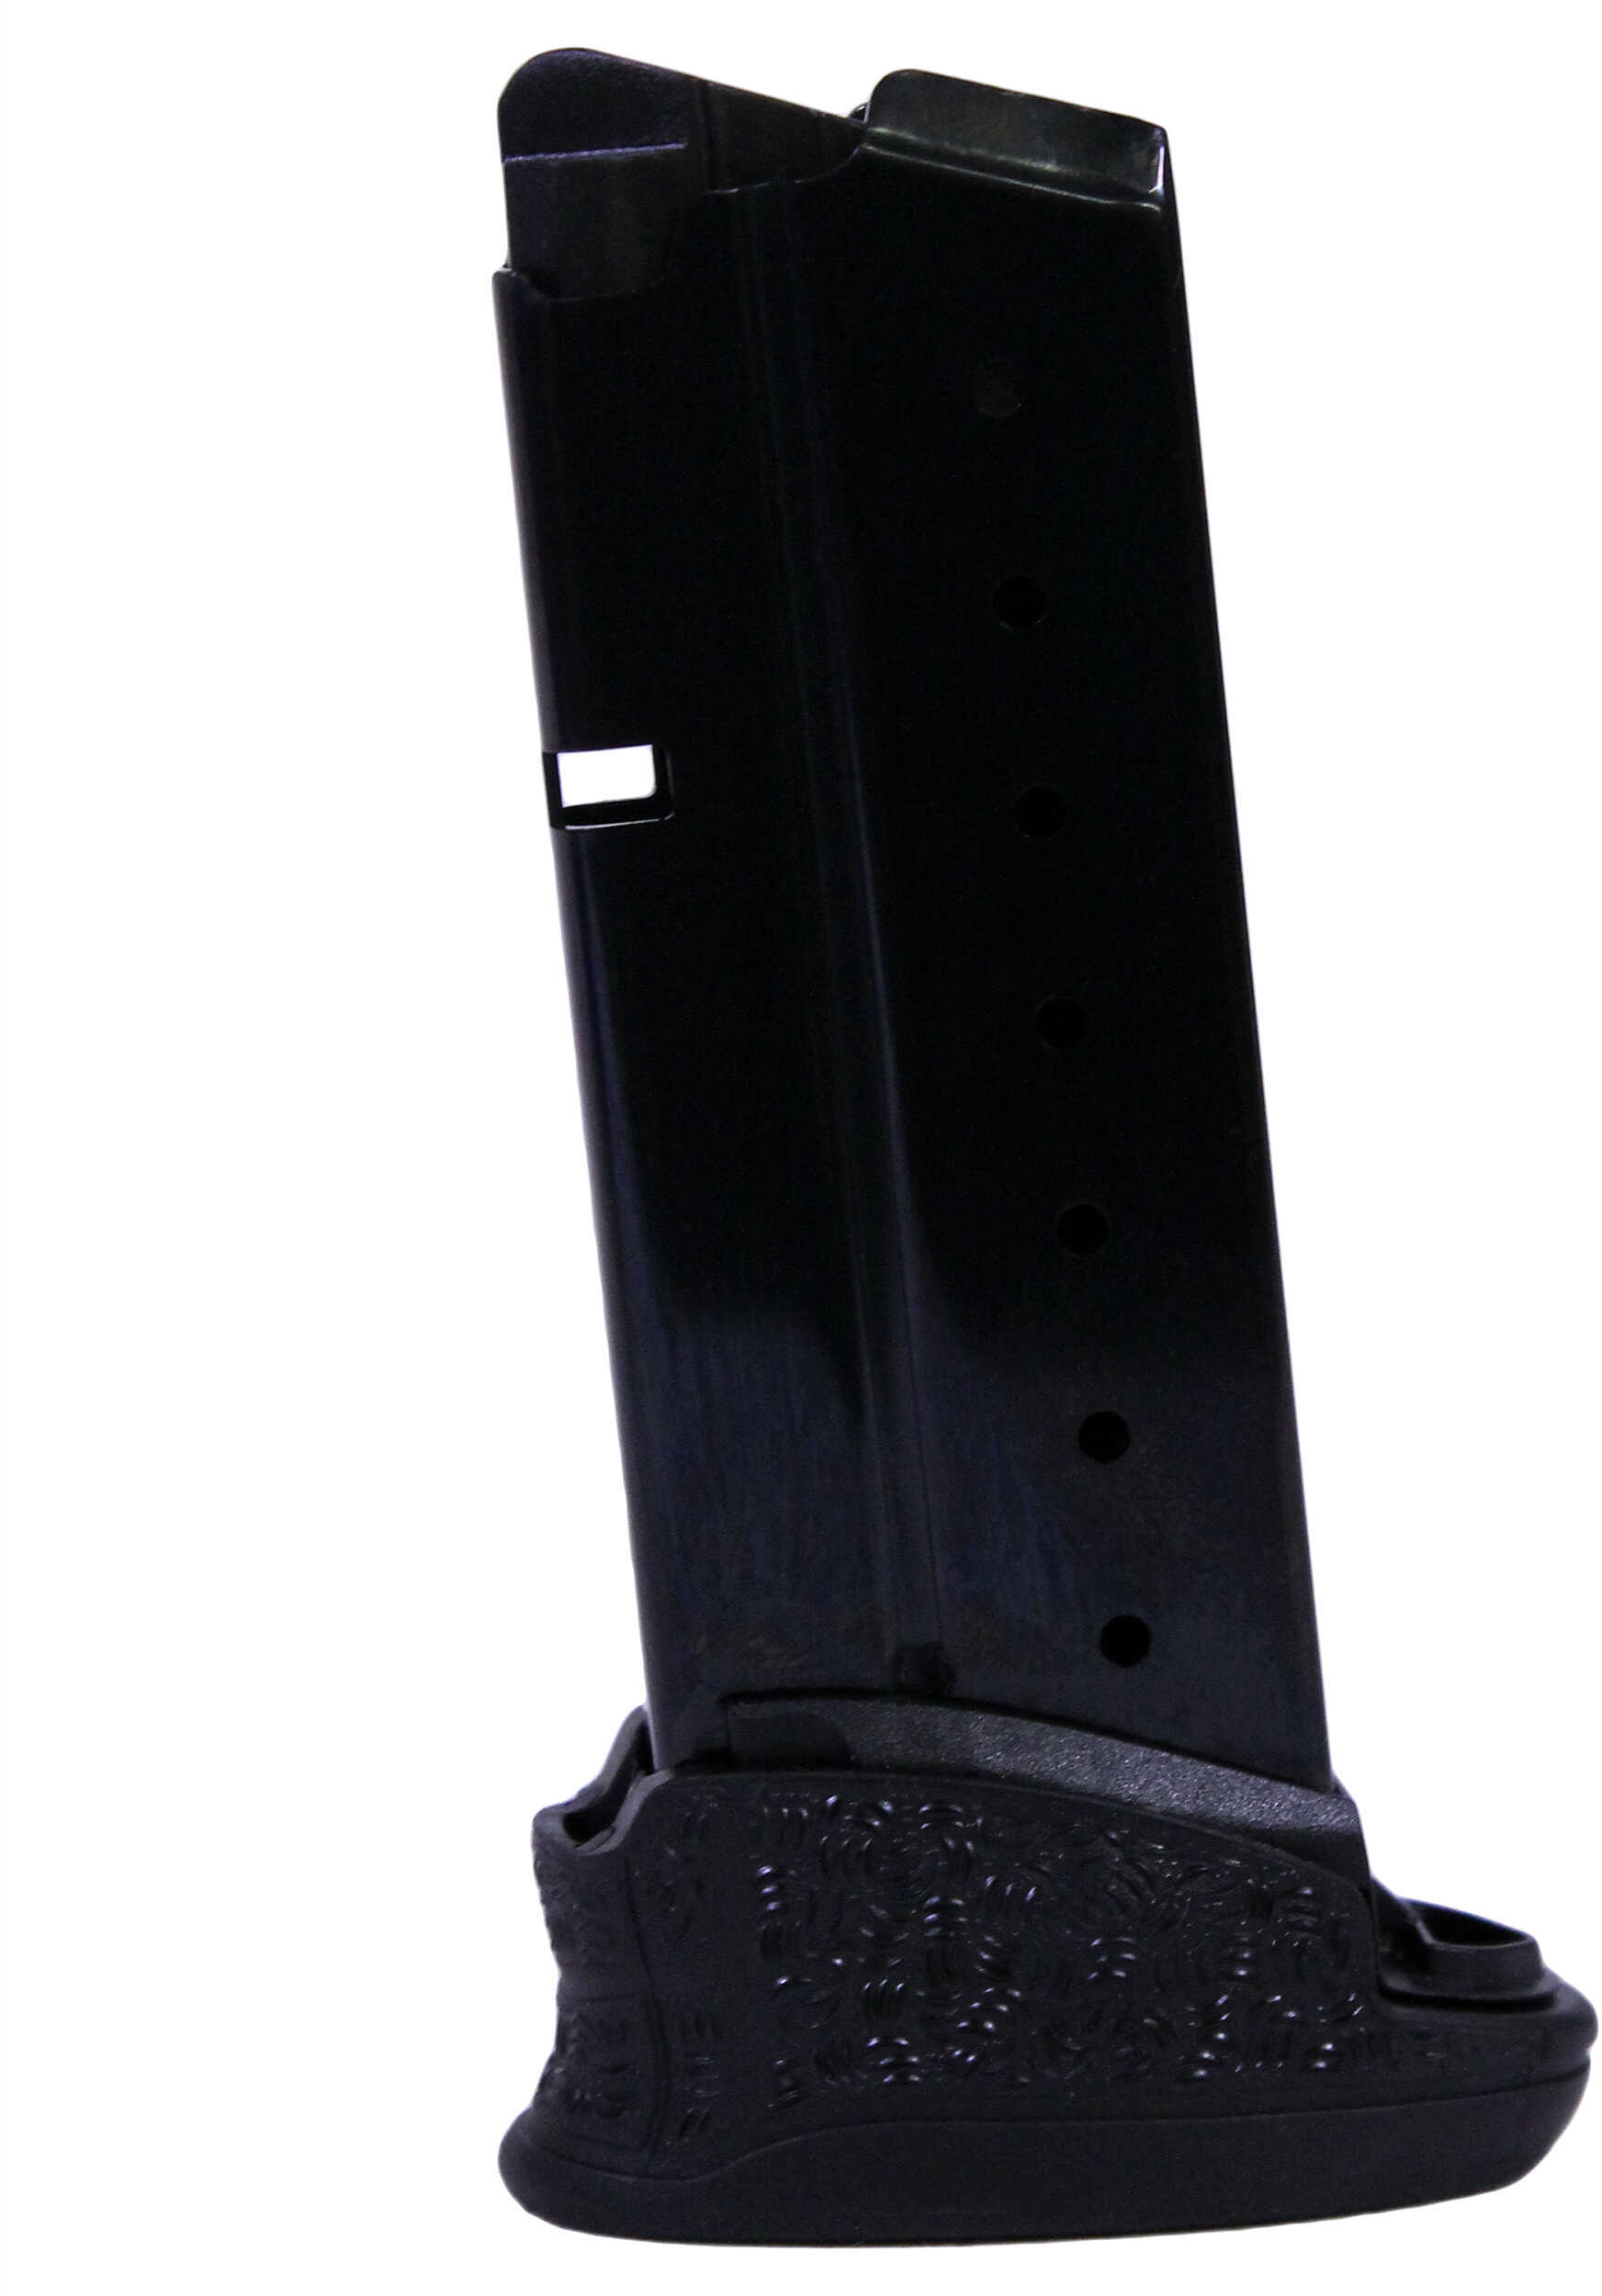 Walther Magazine 9MM 7Rd Black Finish Fits PPS M2 2807793